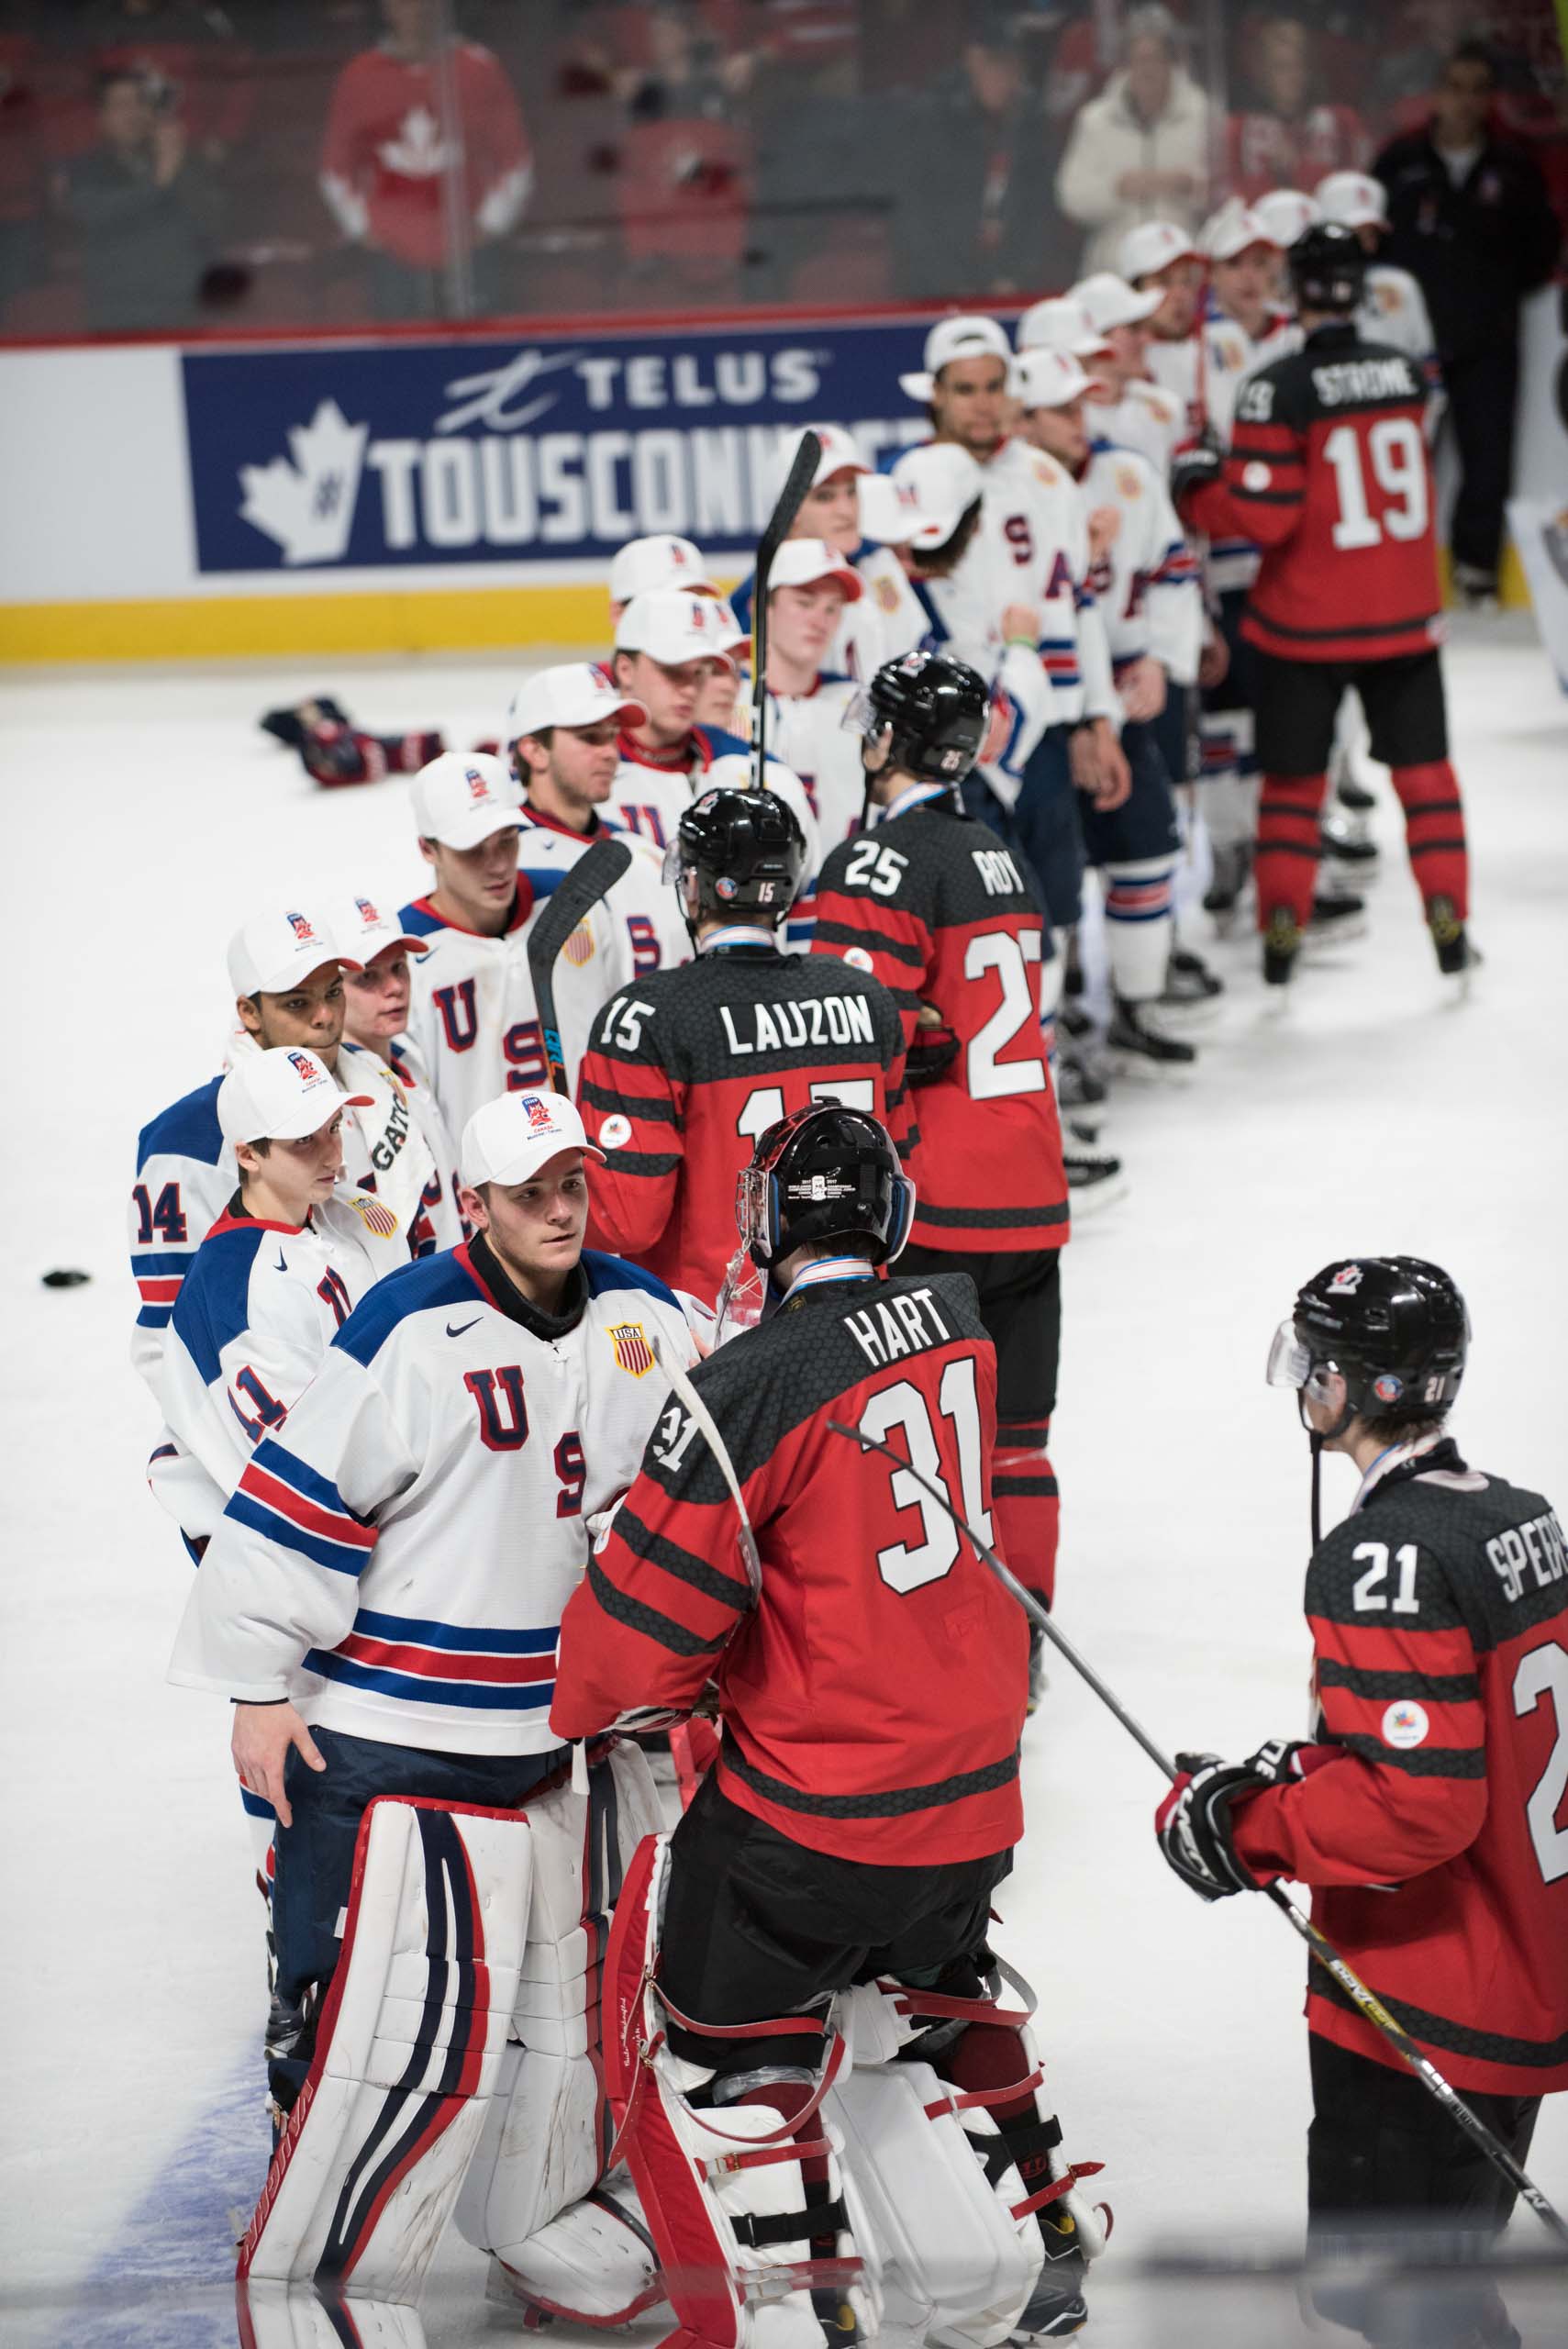 And at the conclusion of this hard-fought battle, the game ends the same way all championship hockey games do: with a handshake line between opponents. (Photo by Julien Grimard) 